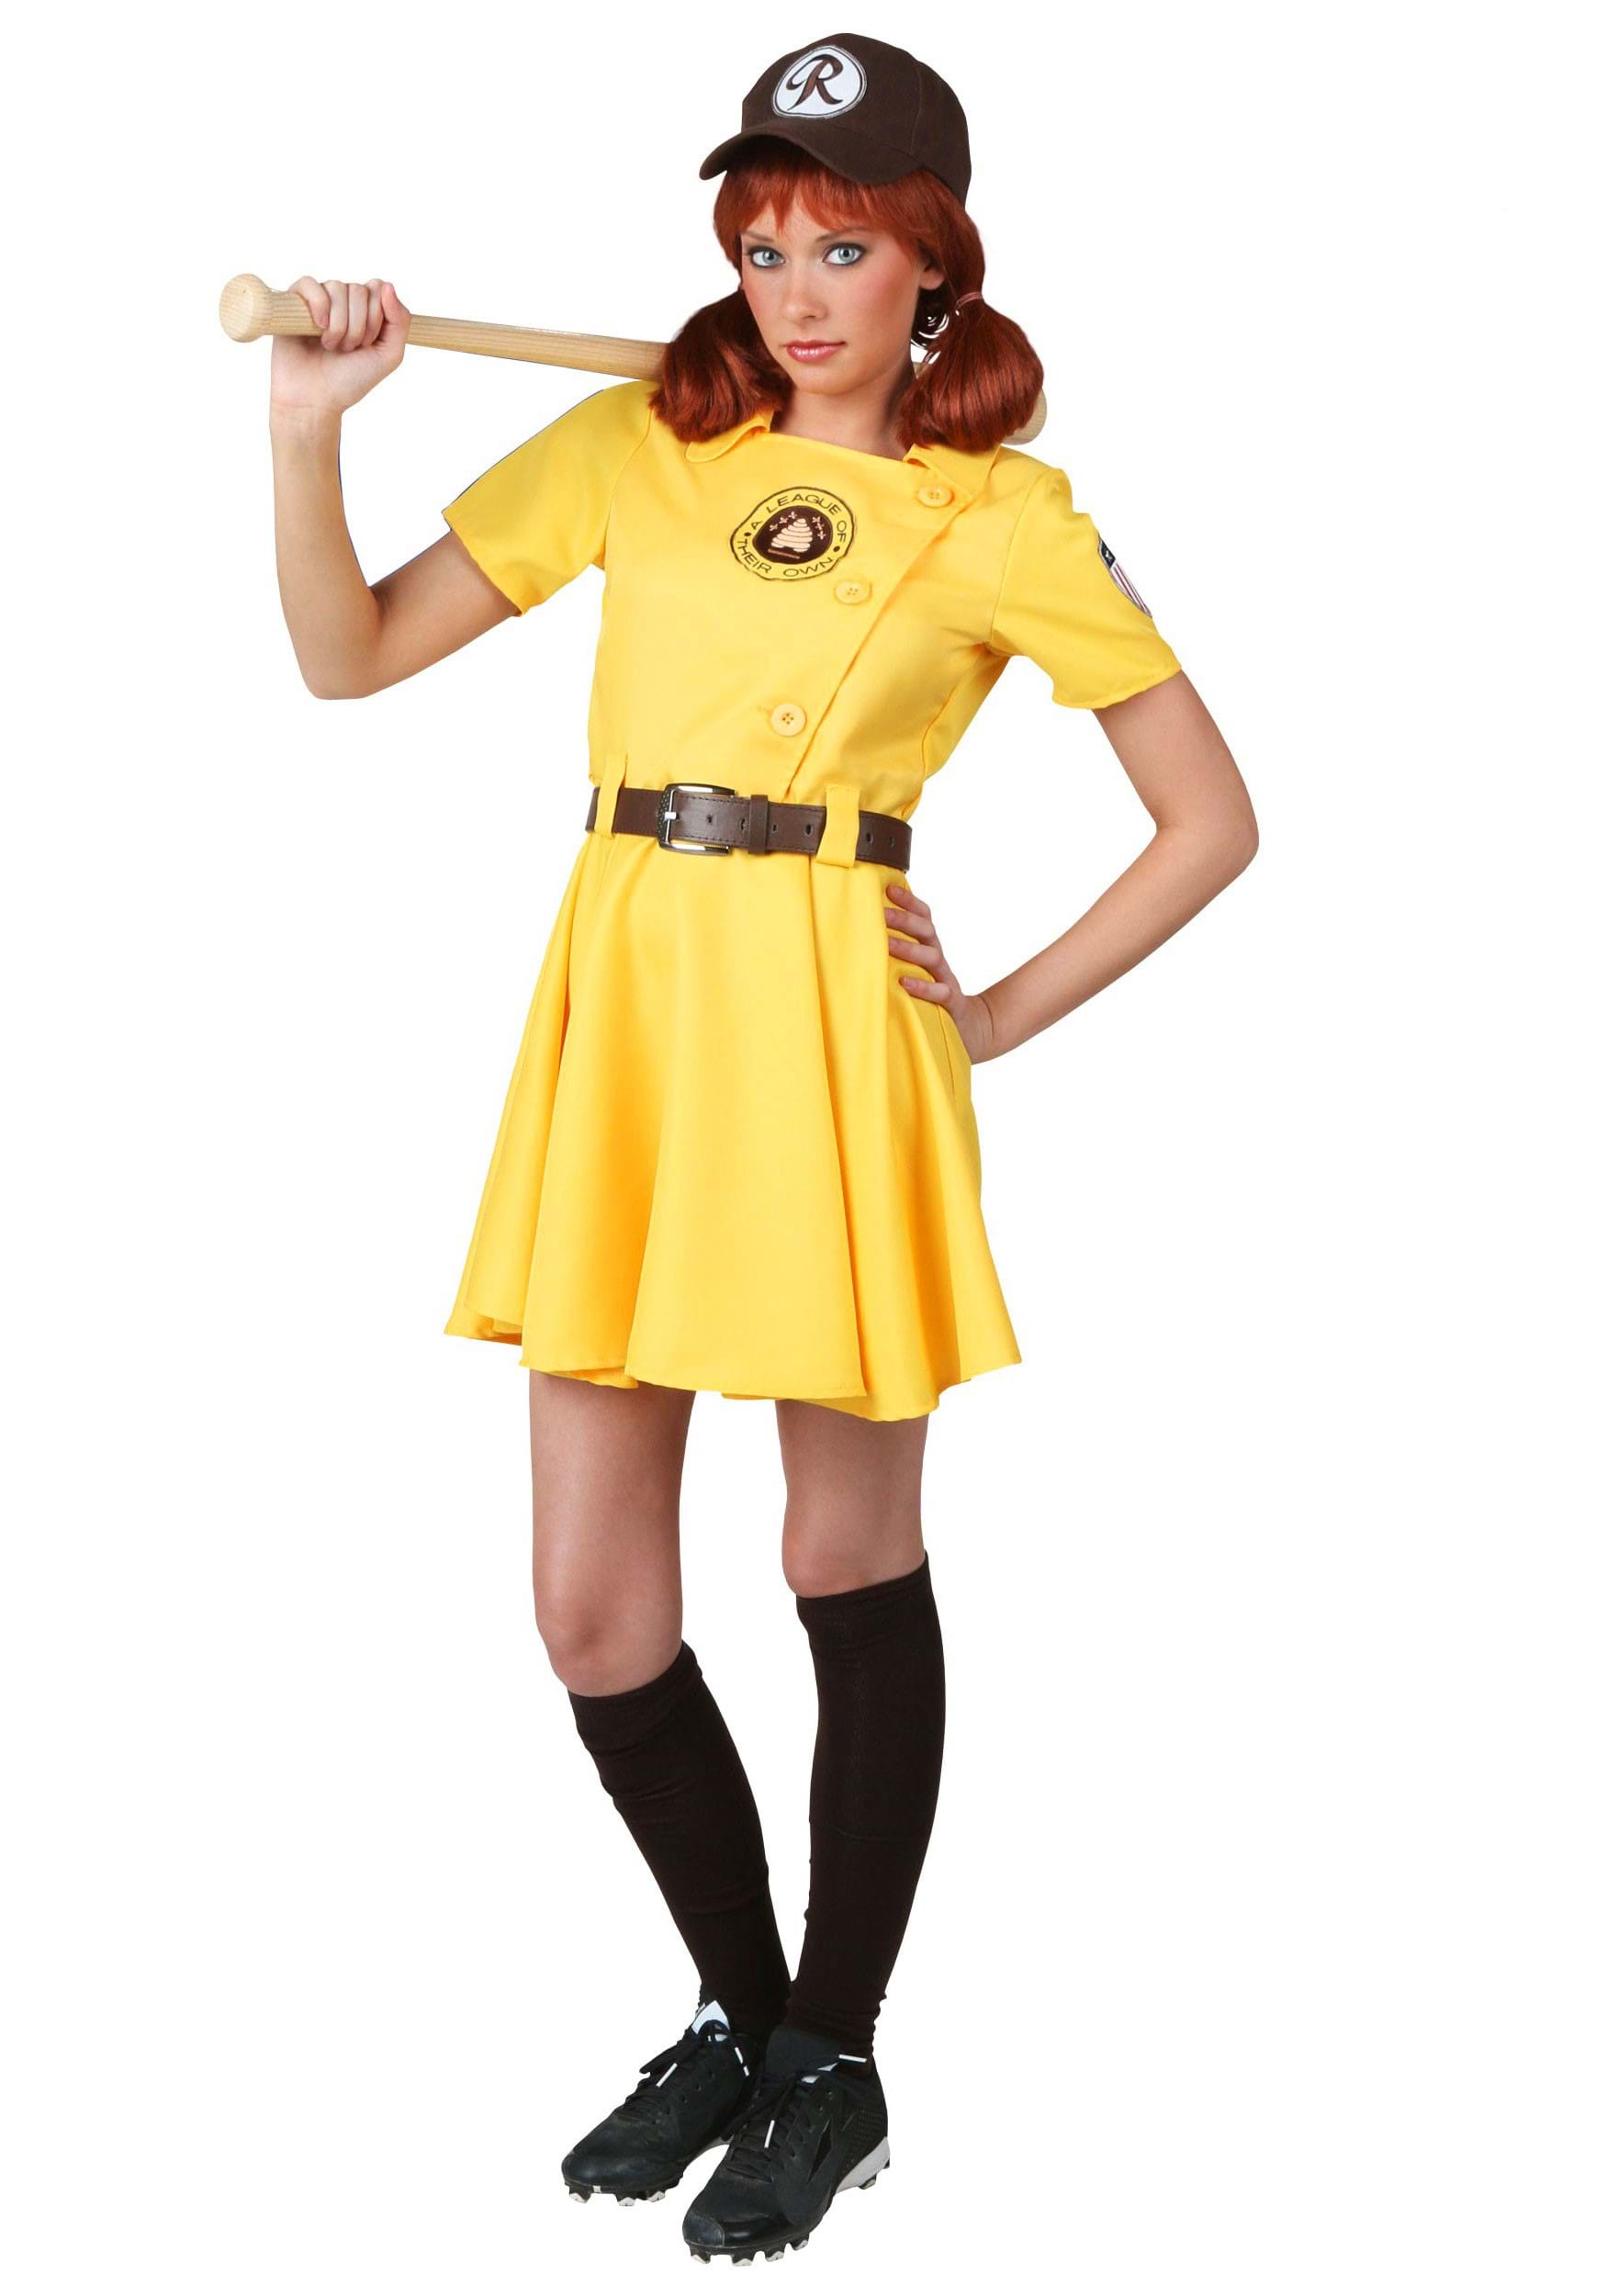 Image of Women's A League of Their Own Kit Baseball Uniform Costume | Exclusive Costumes ID LEA8302AD-L